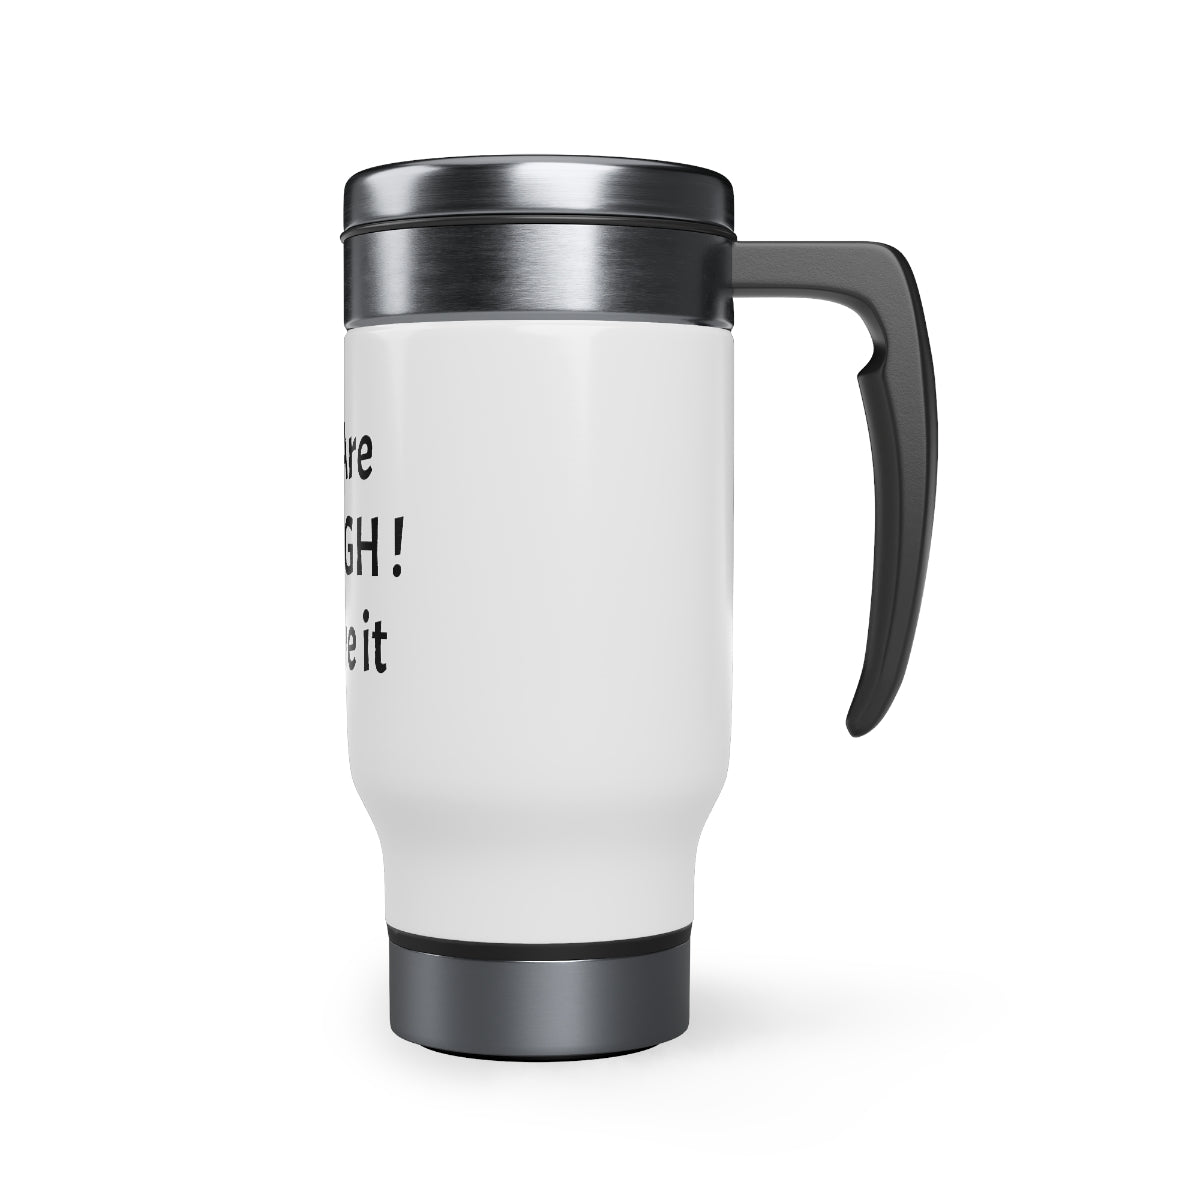 You Are Enough! Stainless Steel Travel Mug with Handle, 14oz